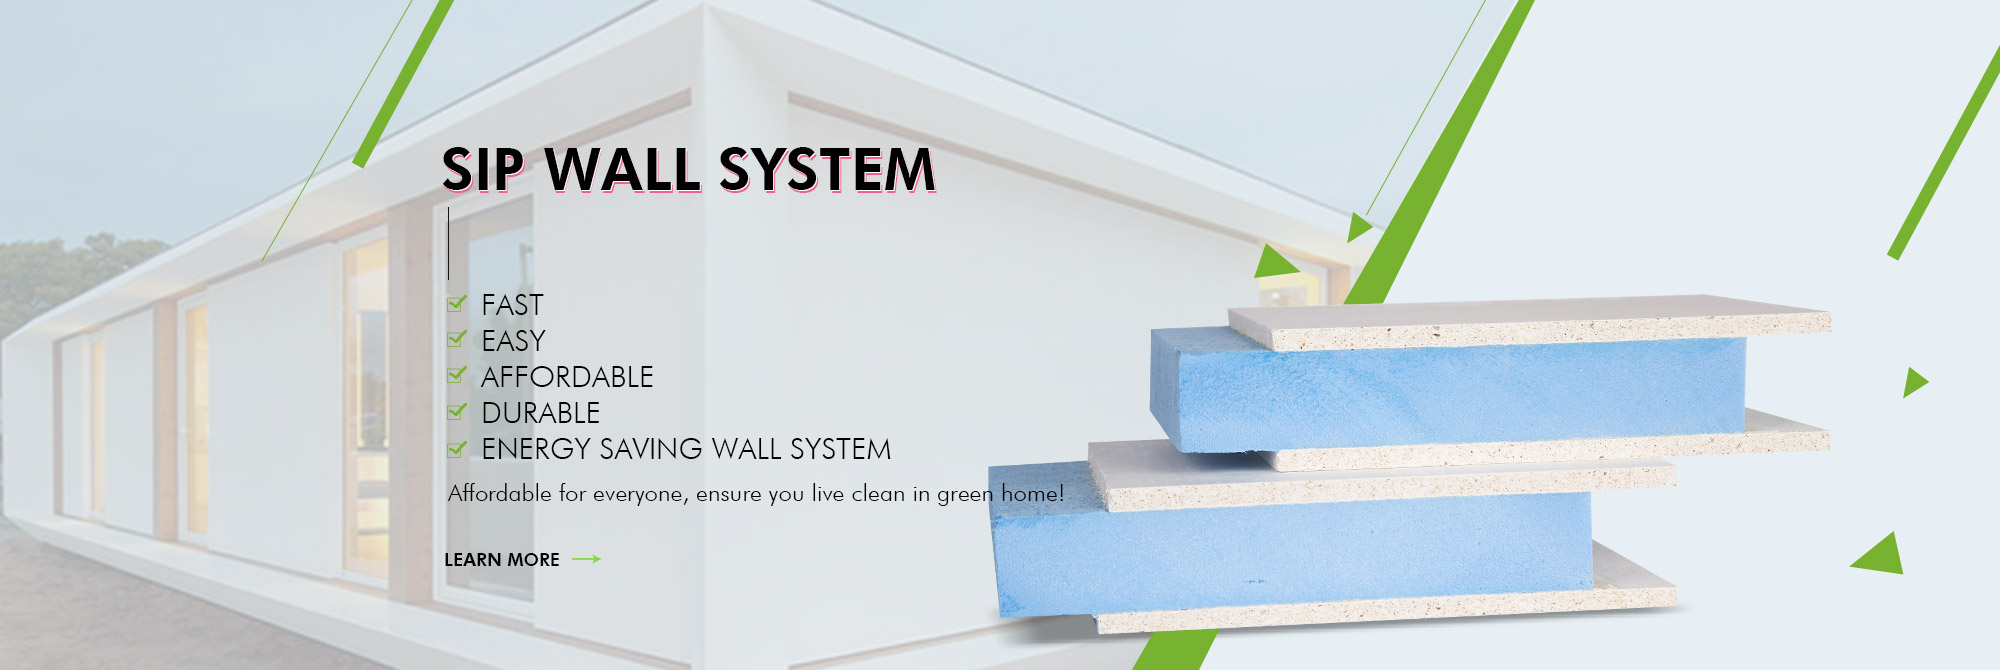 Acoustic Wall Mgo board recommend